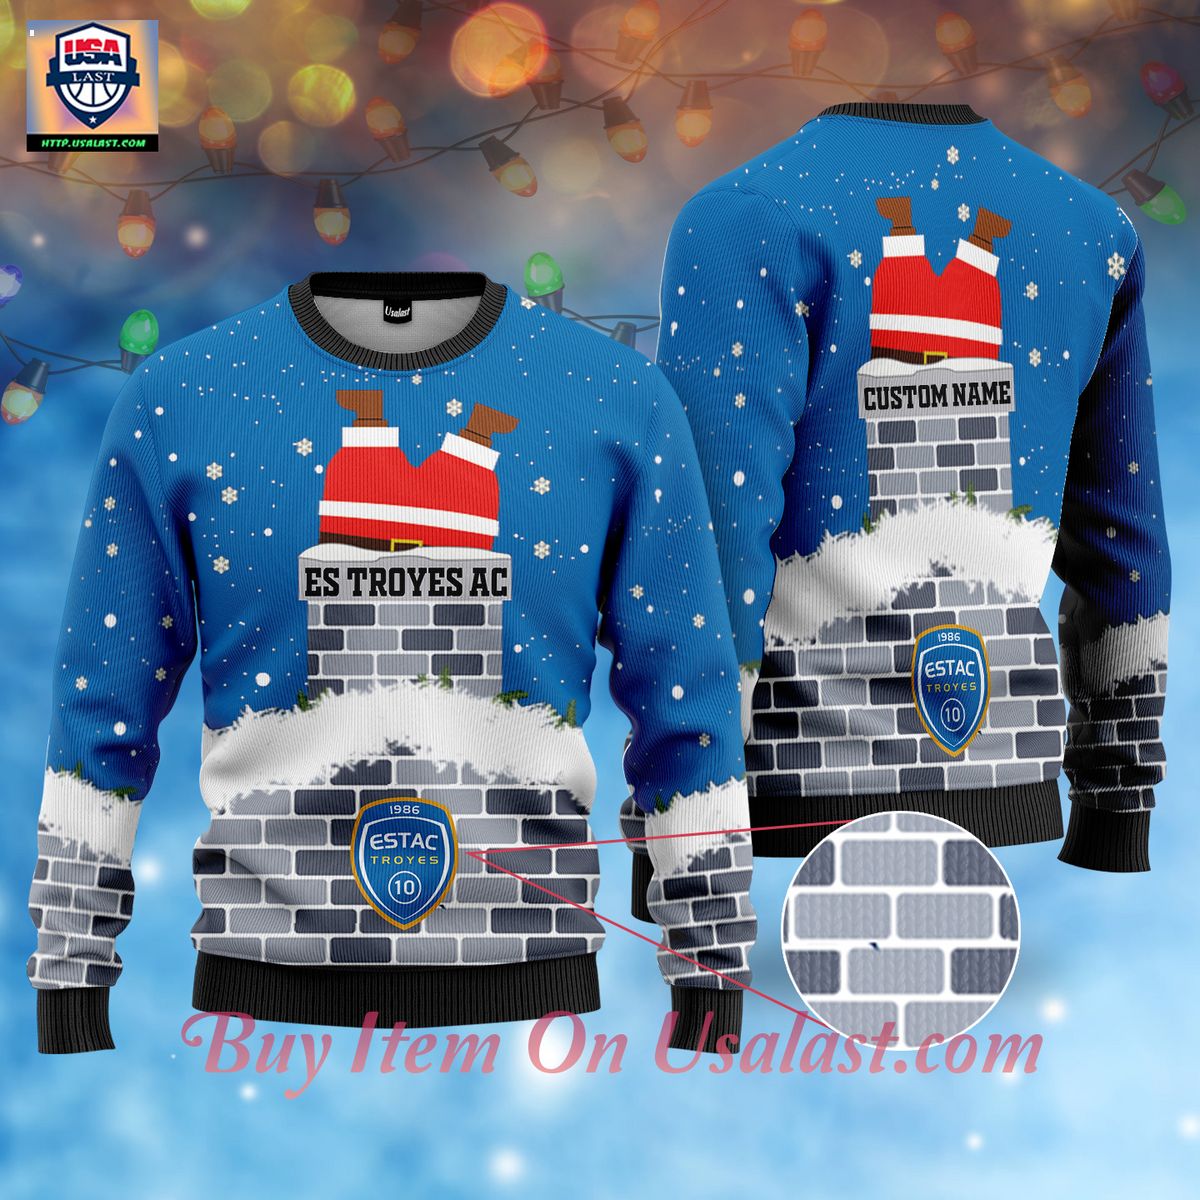 Hot Sale ES Troyes AC Santa Claus Custom Name Ugly Christmas Sweater